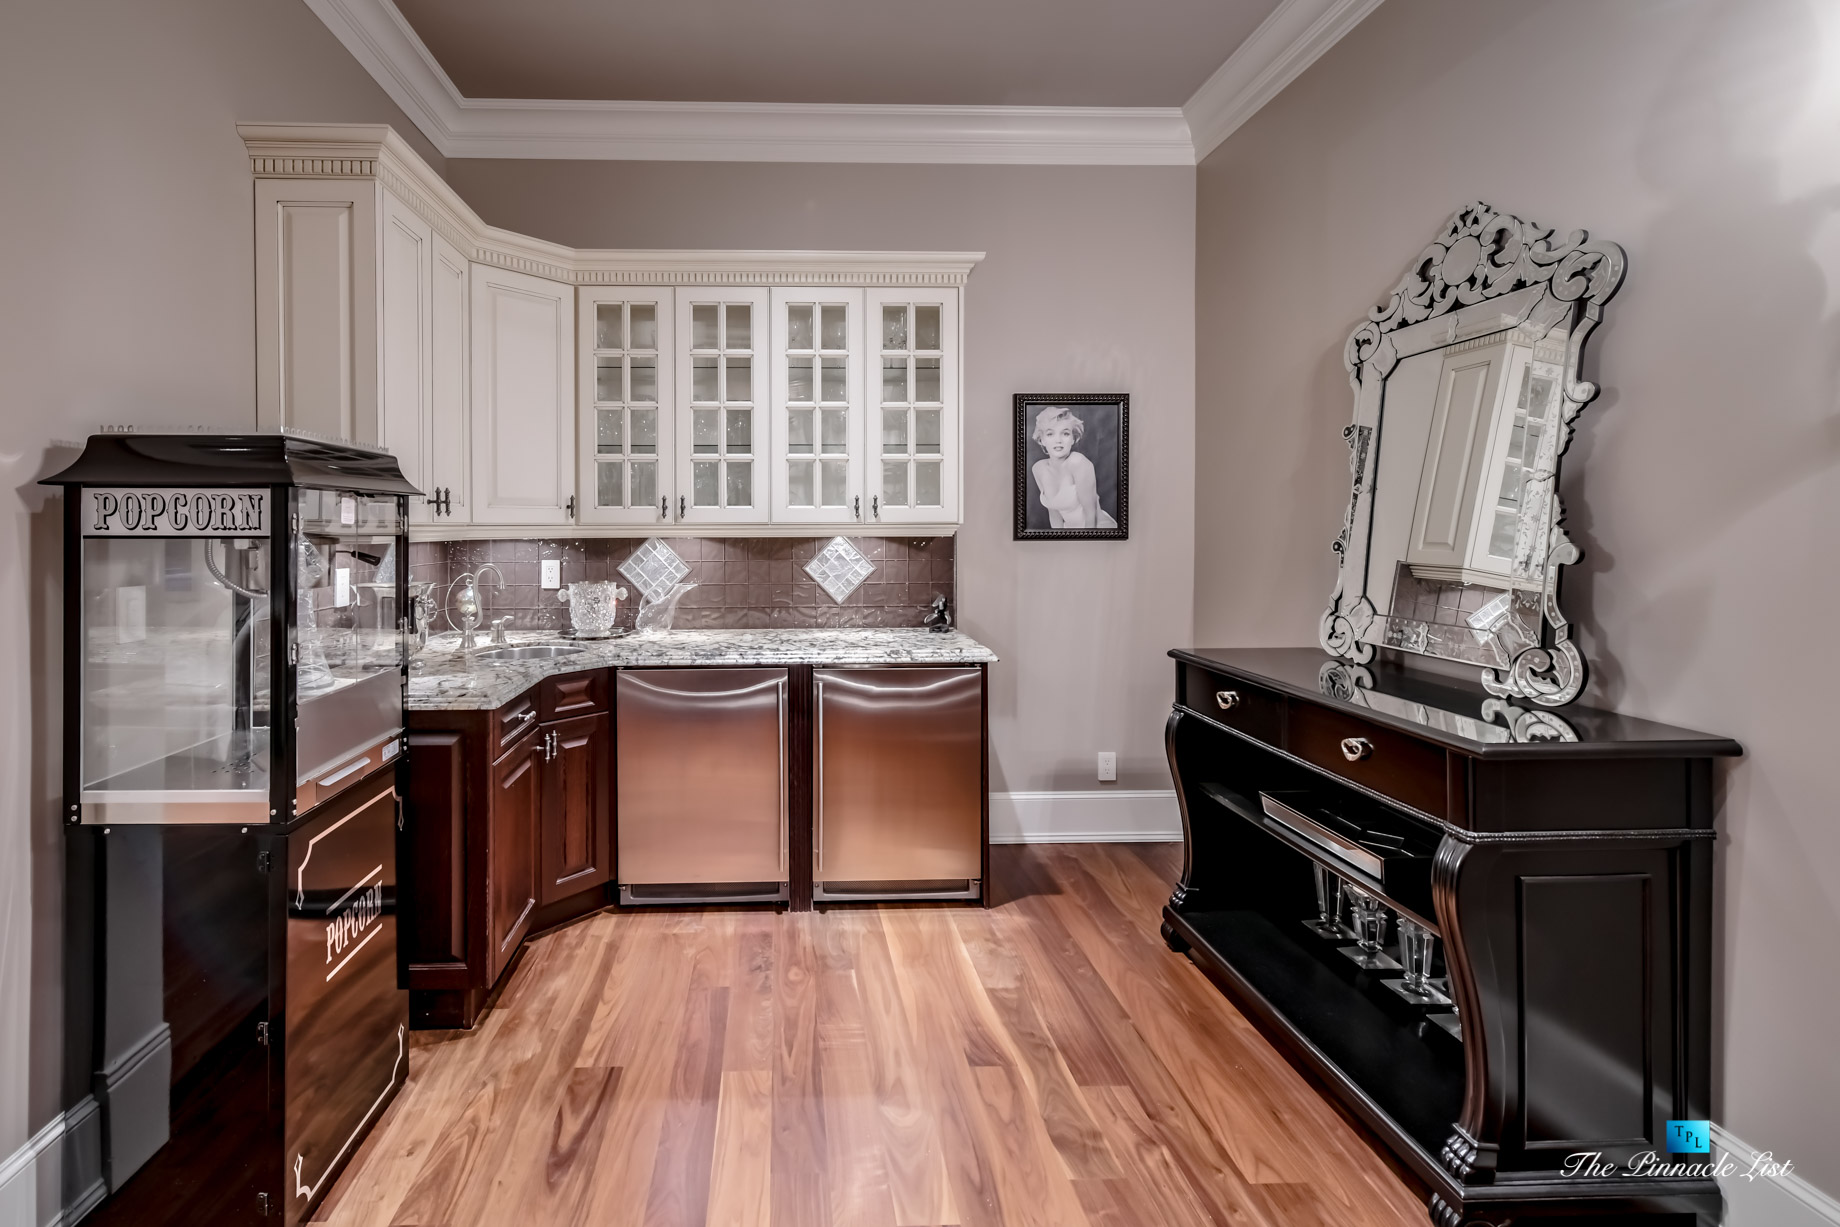 3053 Anmore Creek Way, Anmore, BC, Canada - Theatre Room Bar - Luxury Real Estate - Greater Vancouver Home